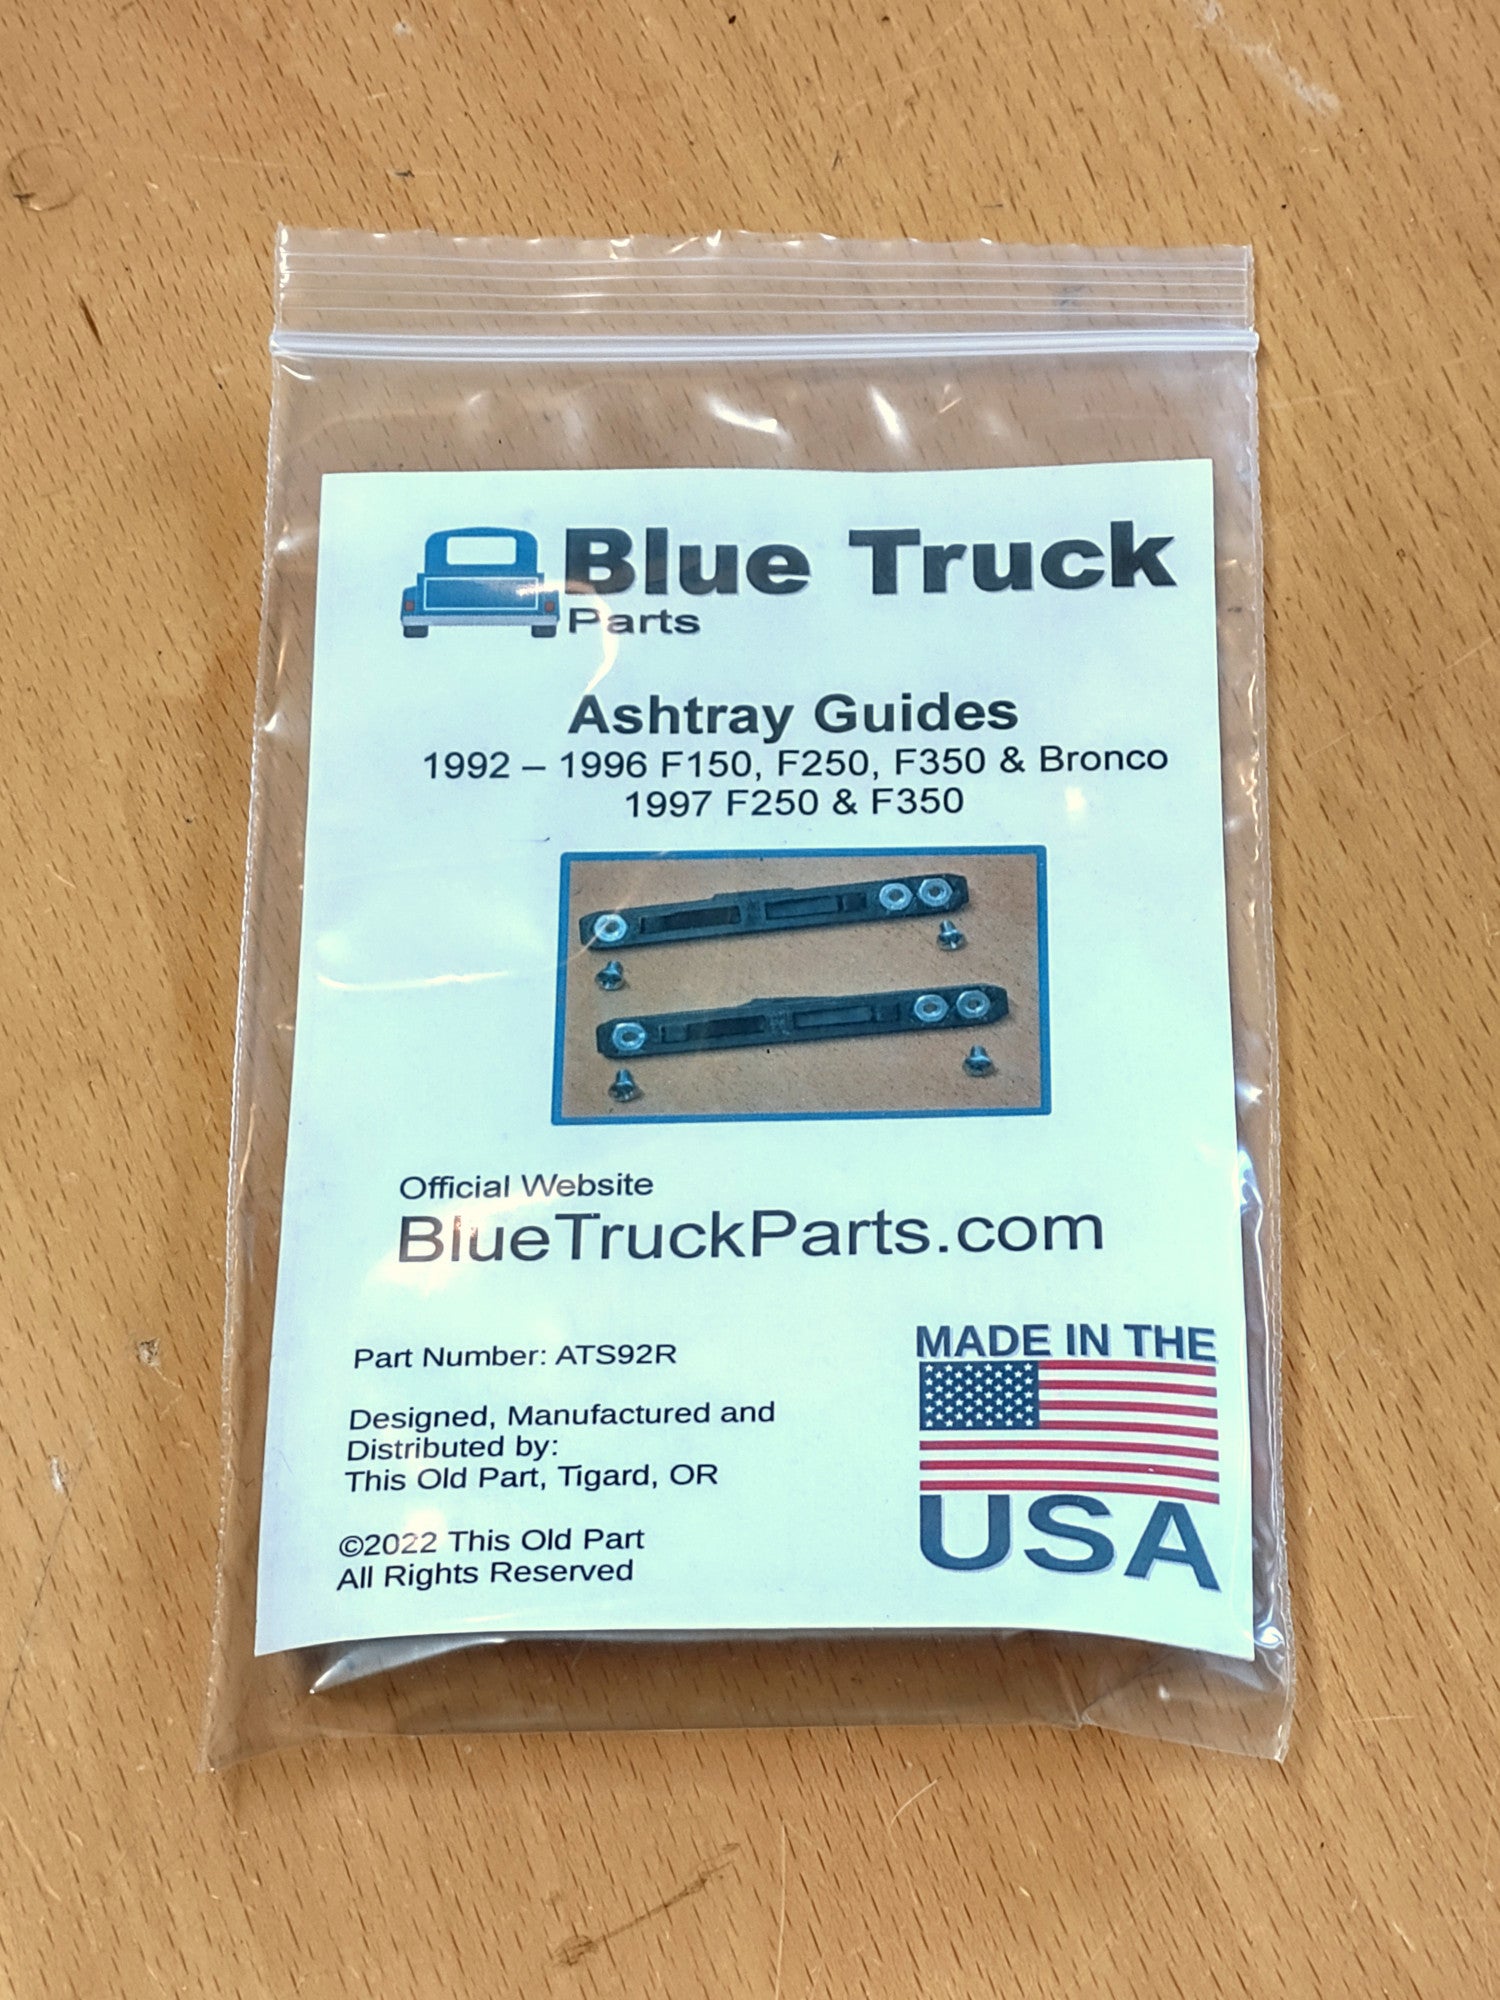 Packing for Ashtray guides for 1992 to 1996 F150, F250, F350, or Bronco